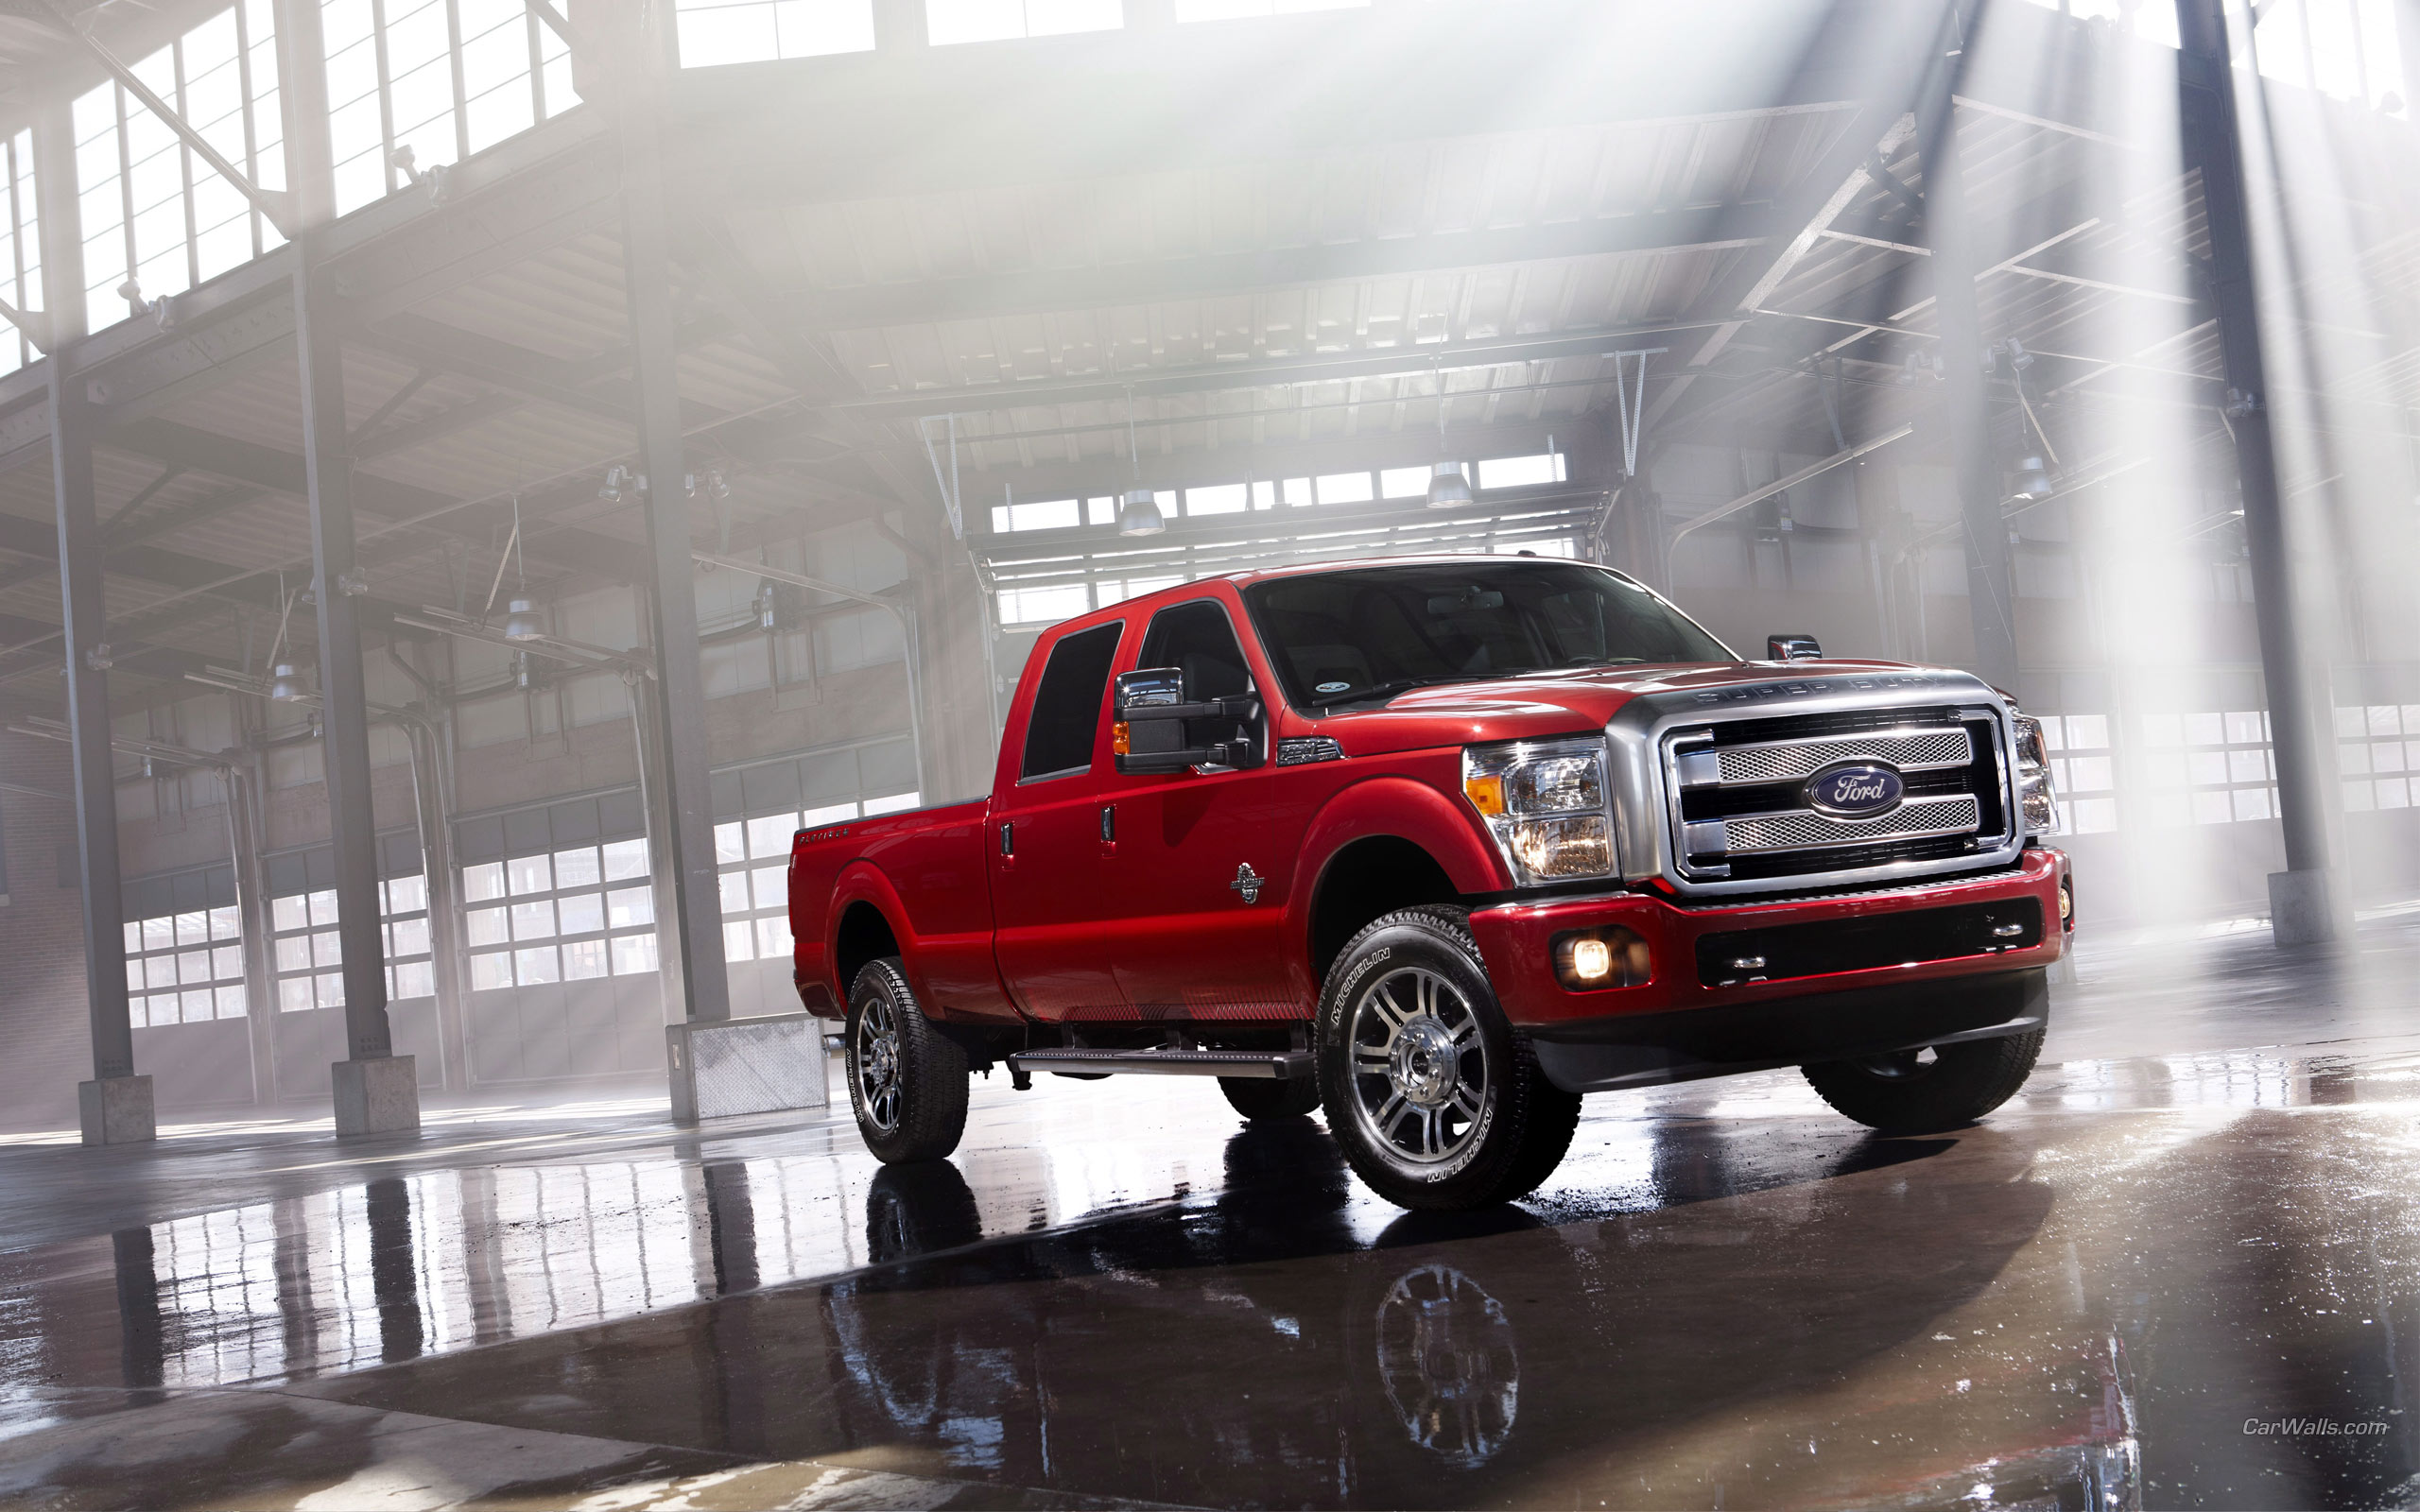 Vehicles 2013 Ford F-Series Super Duty HD Wallpaper | Background Image